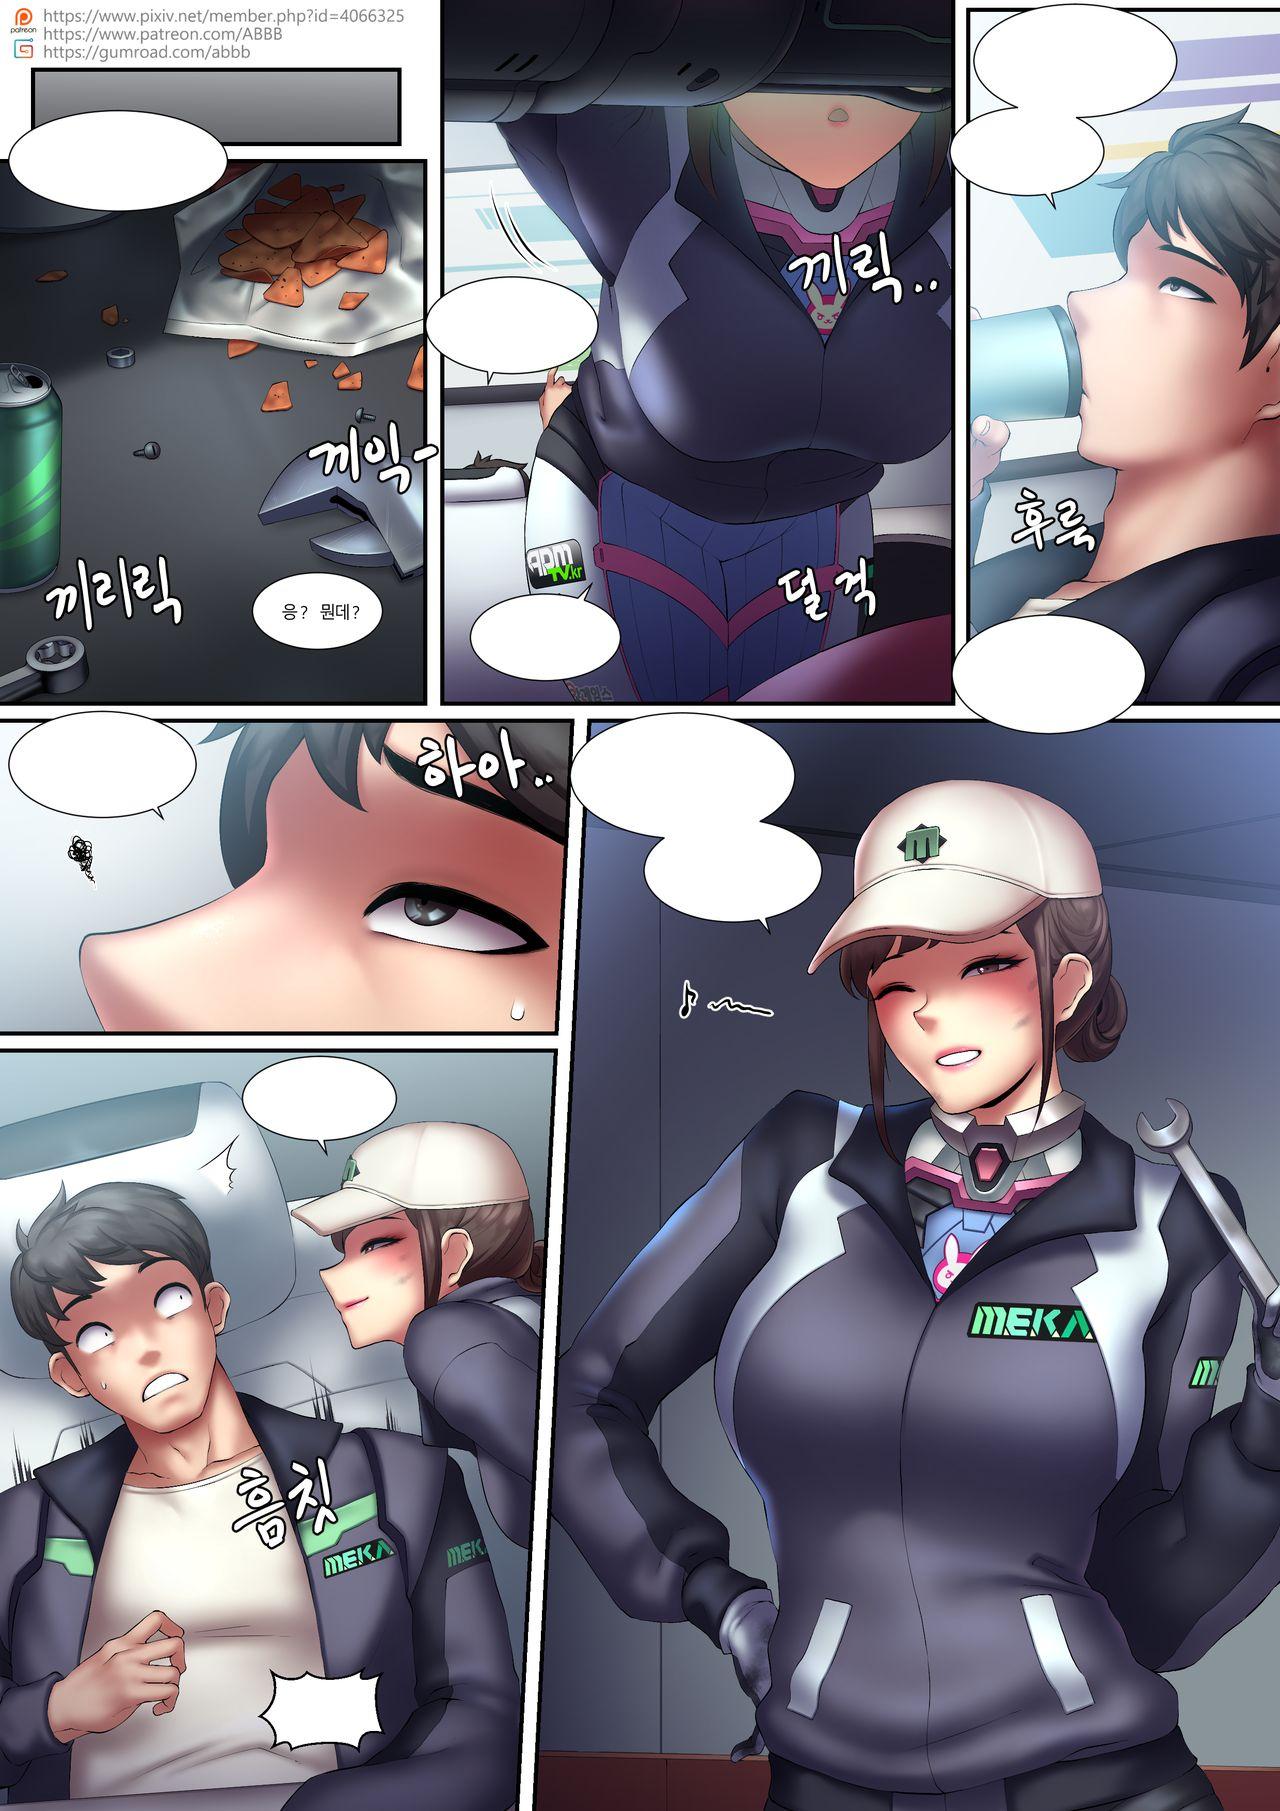 Costume Shooting Star - Overwatch Hardcore Porn Free - Page 2